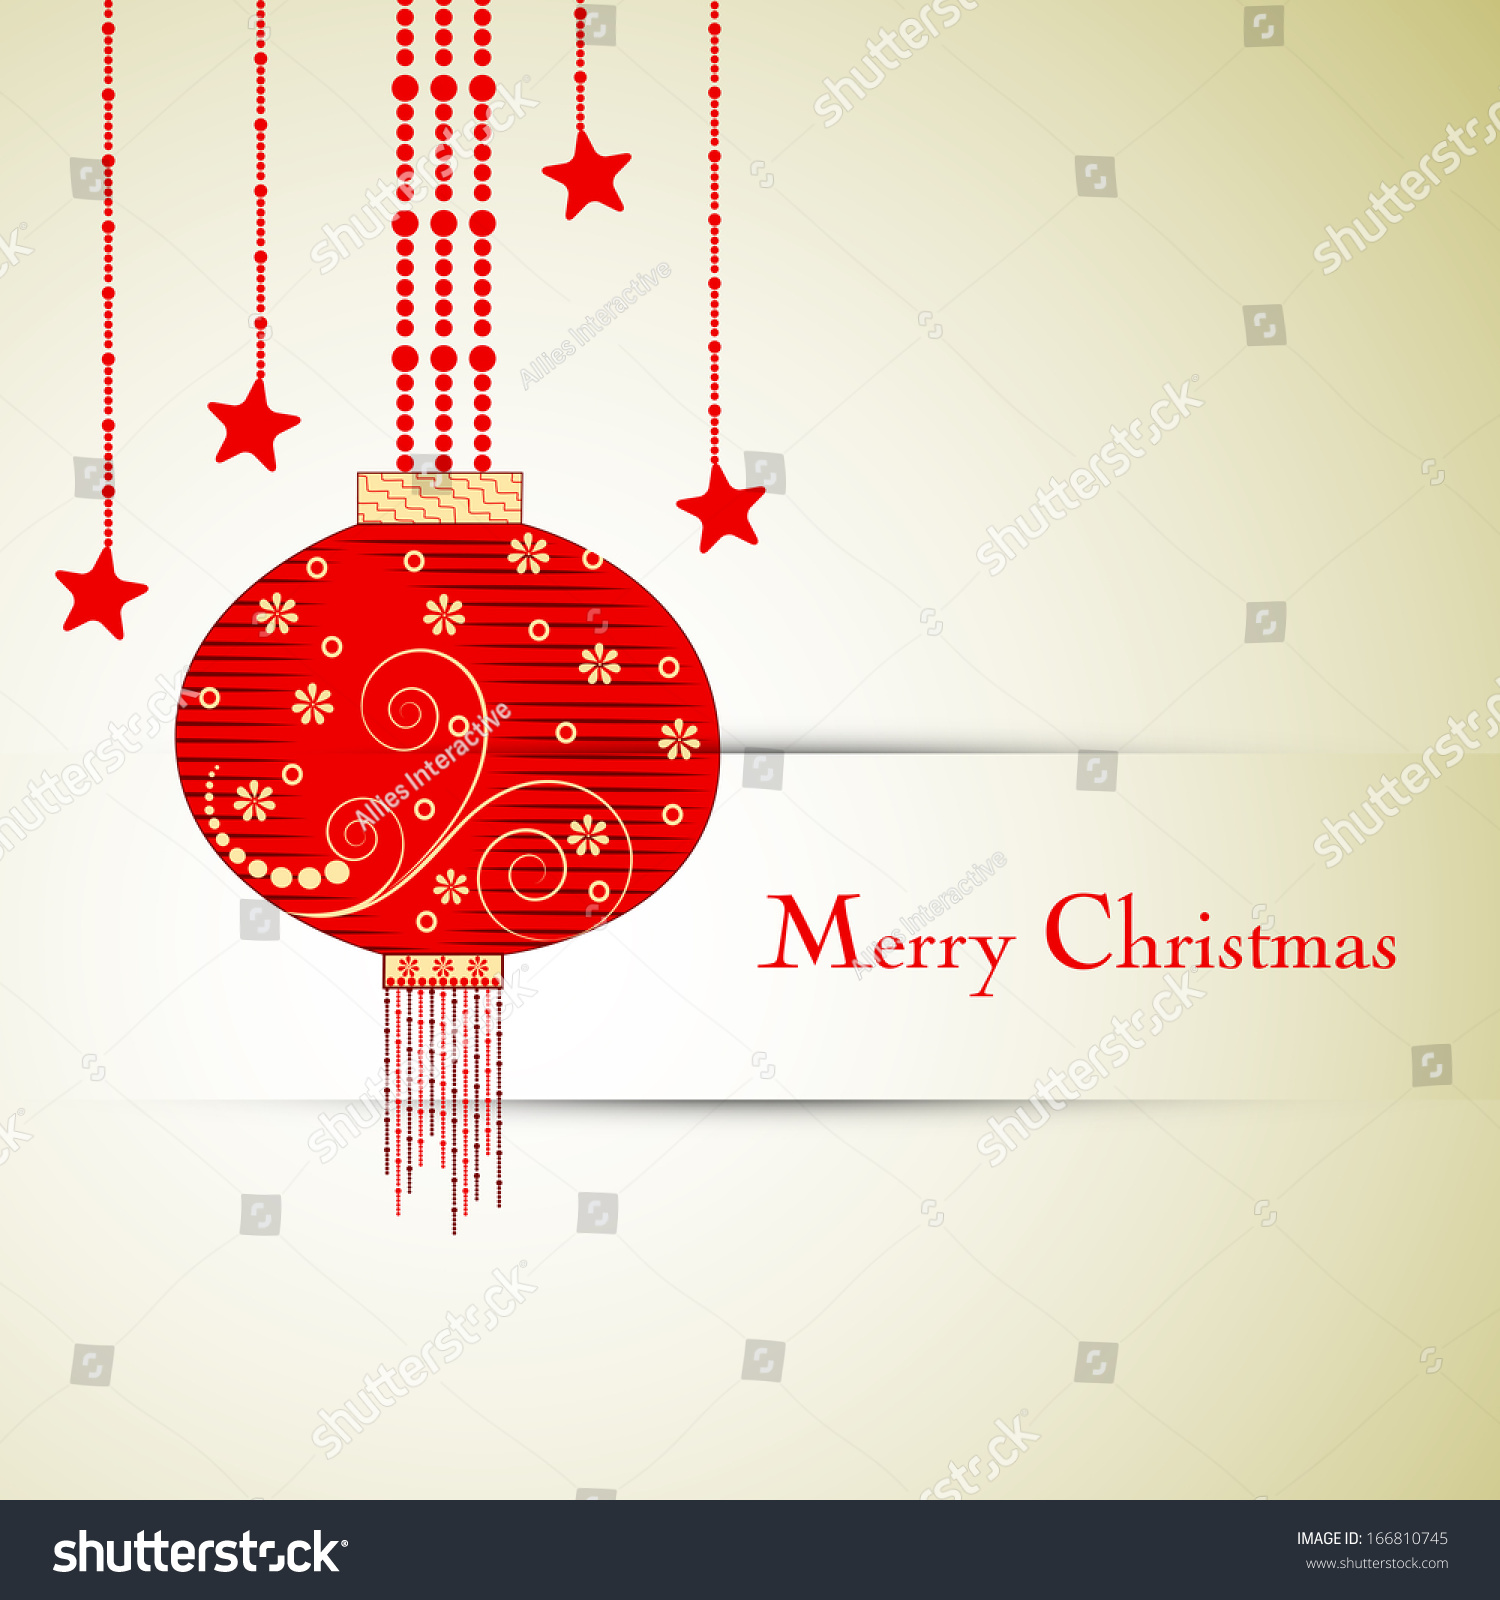 Merry Christmas celebration greeting card or invitation card with hanging Xmas ball in red color on